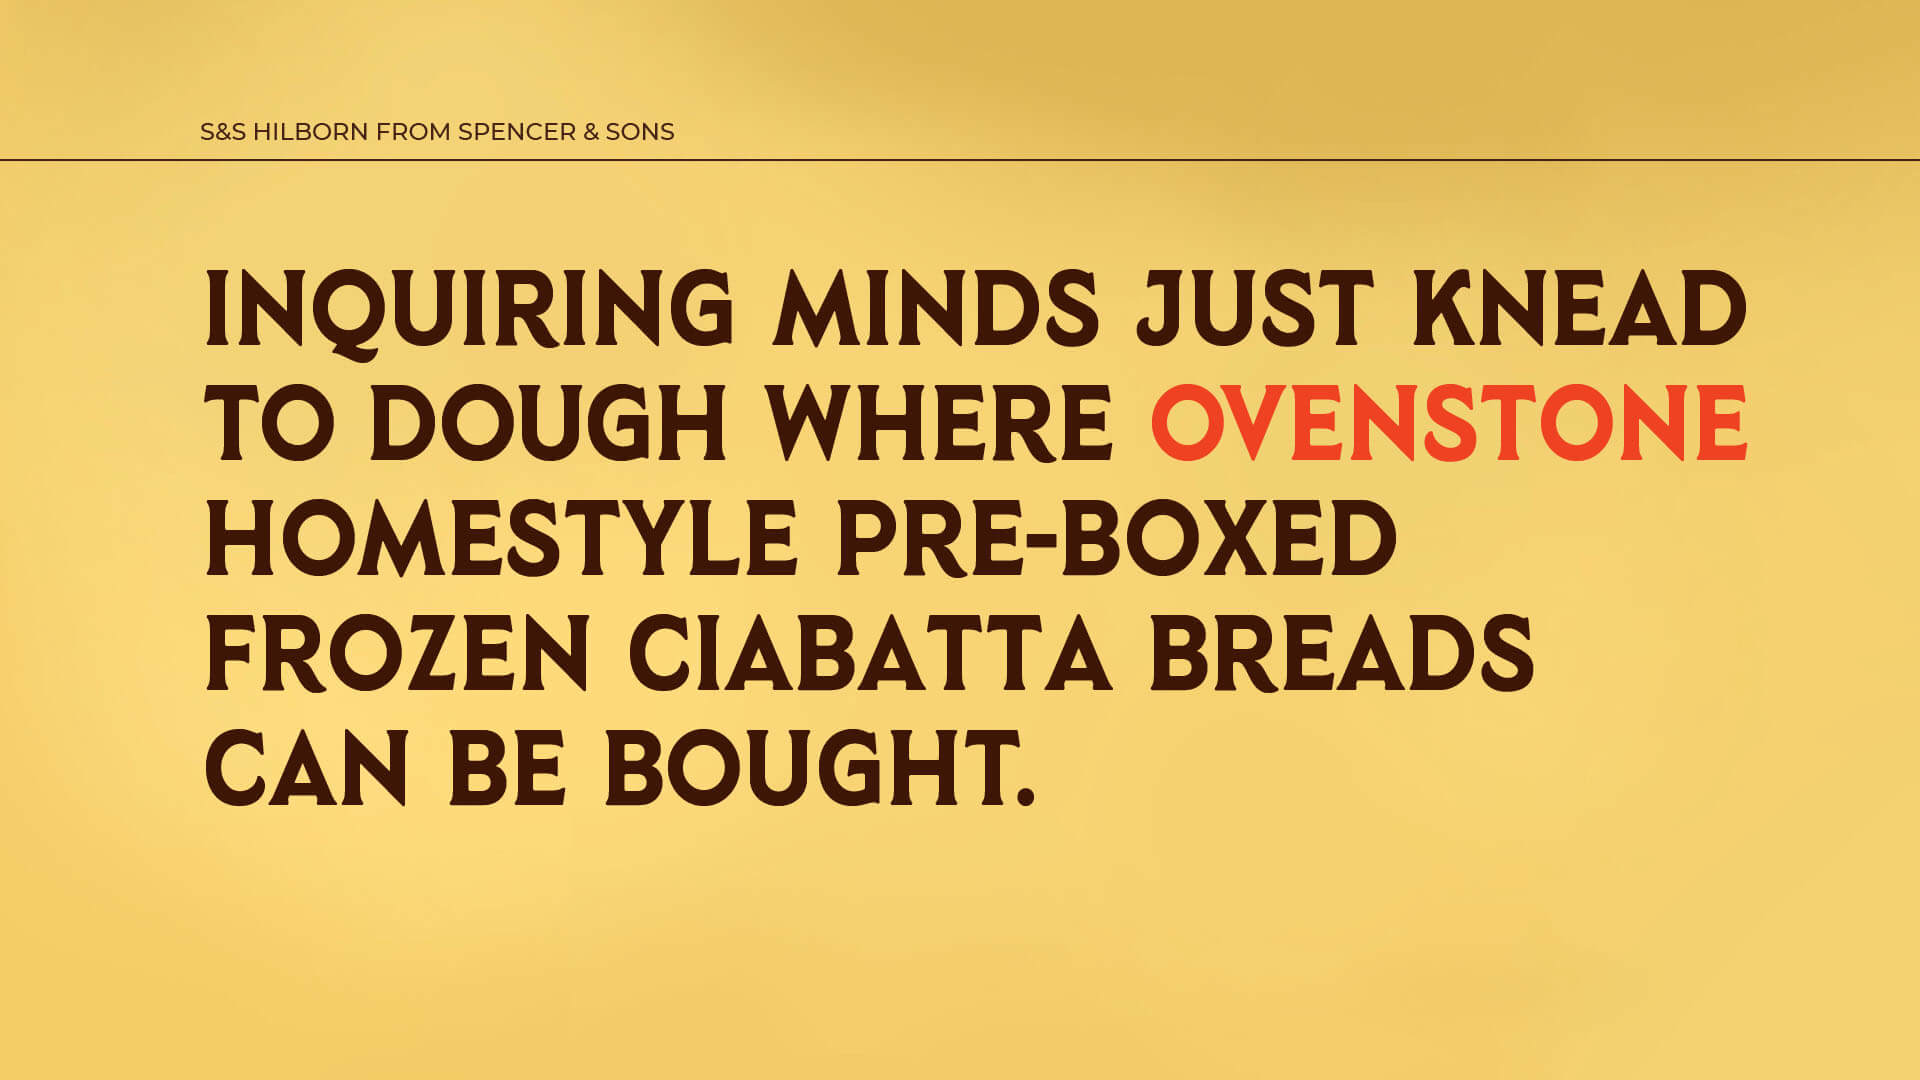 S&S Hilborn Type Specimen Pangram: Inquiring minds just knead to dough where OvenStone homestyle pre-boxed frozen ciabatta breads can be bought.